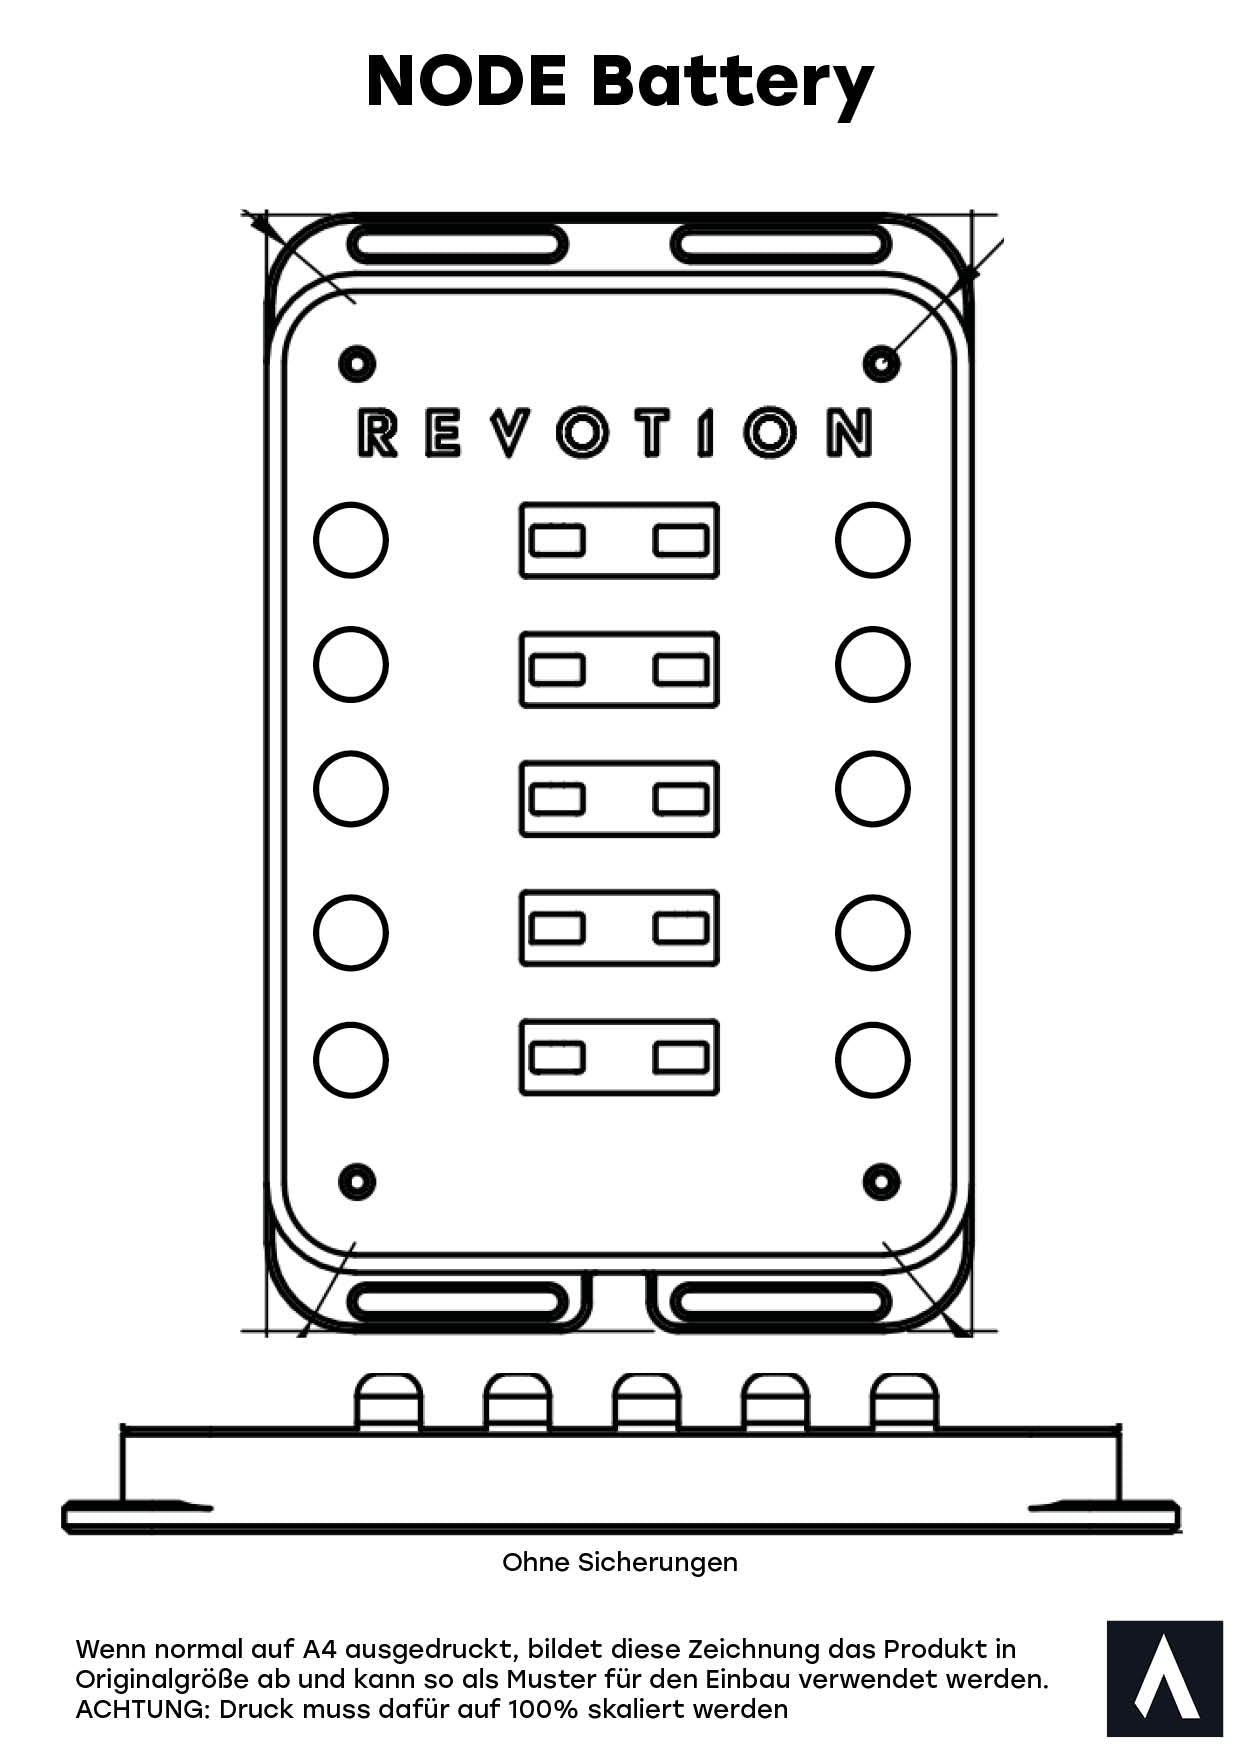 Technical Drawing as print template for revotion node battery